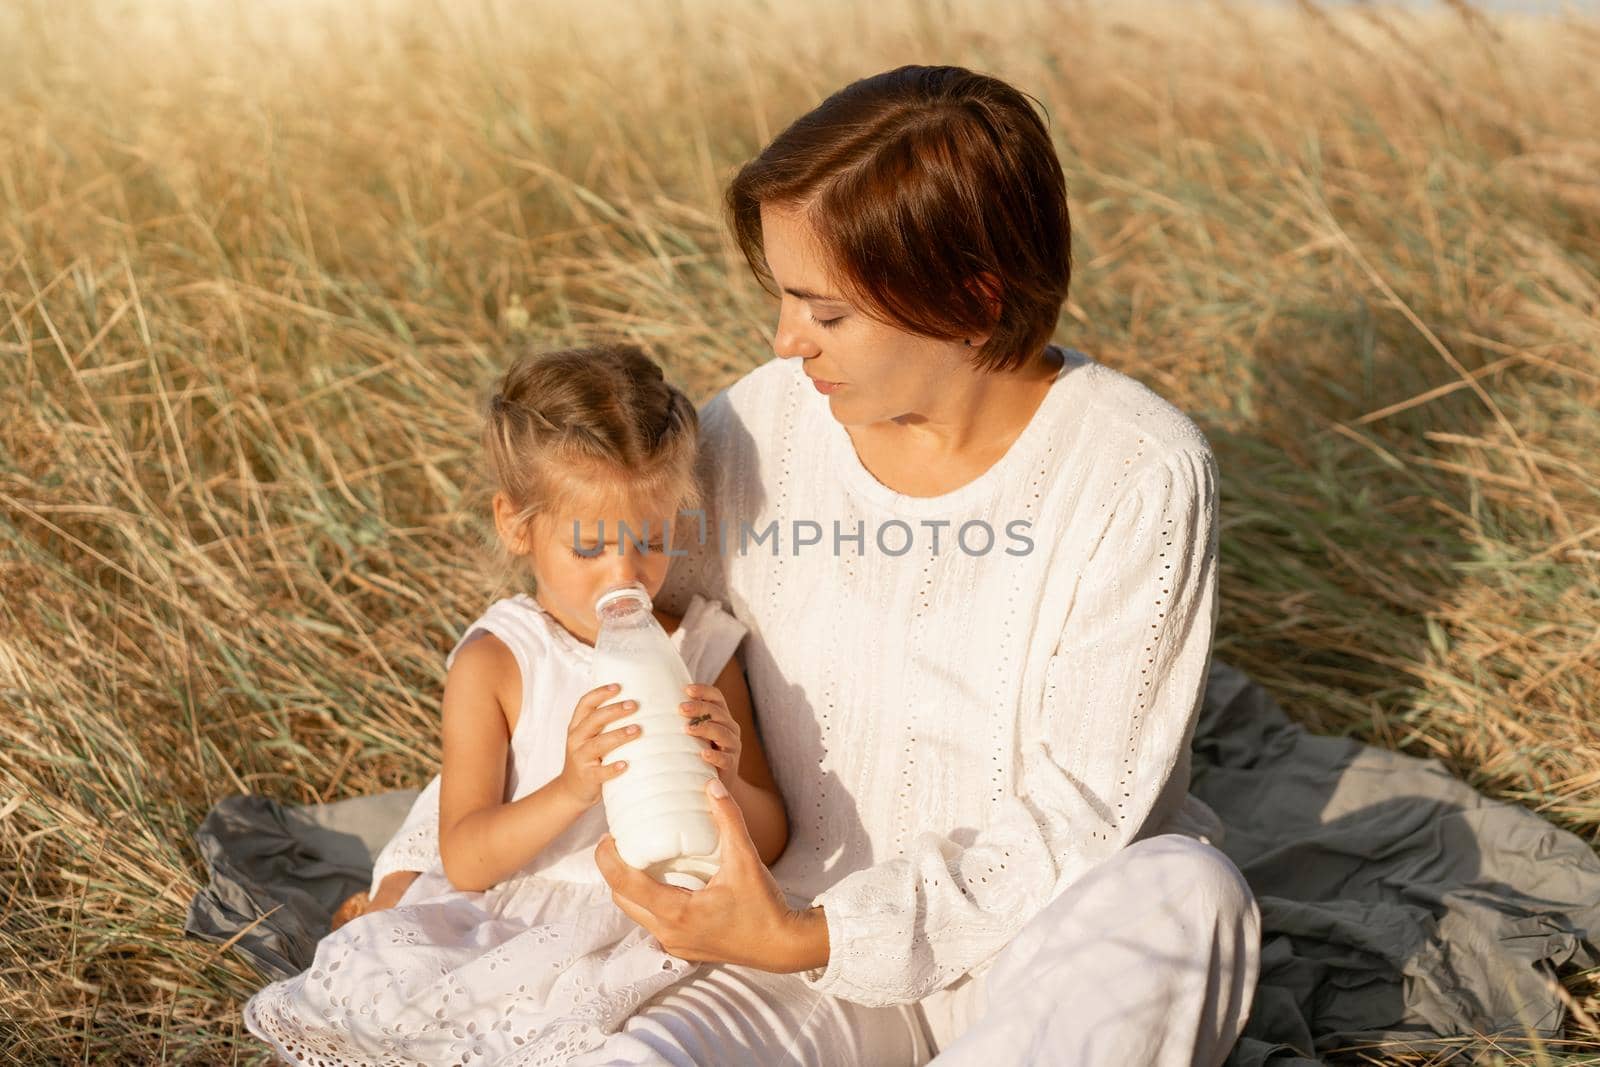 Little girl with her mother drink milk plastic bottle. Happy family, daughter with mom resting outdoor drink healthy diary product. Countryside rural scene. Caucasian female on nature